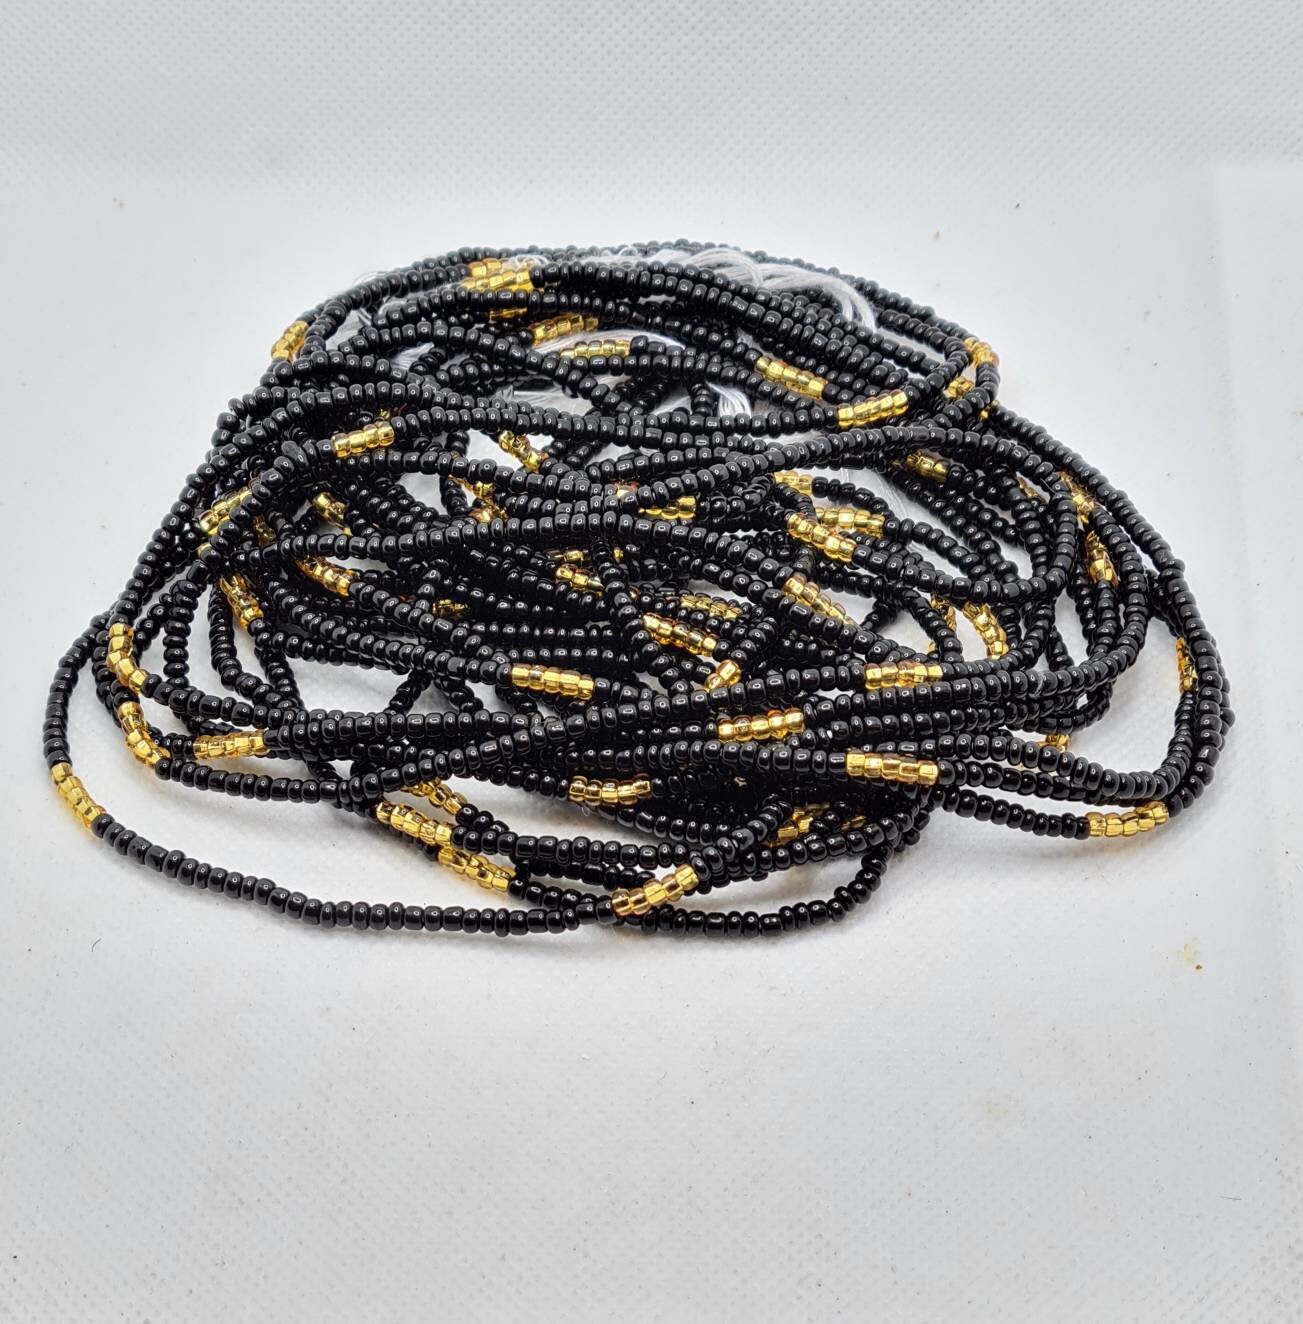 Black and Gold Waist Beads|On Sale Belly Chain Weight control African beads|belly beads| Ghana beads| Weight Tracker Beads| Nigerian Beads